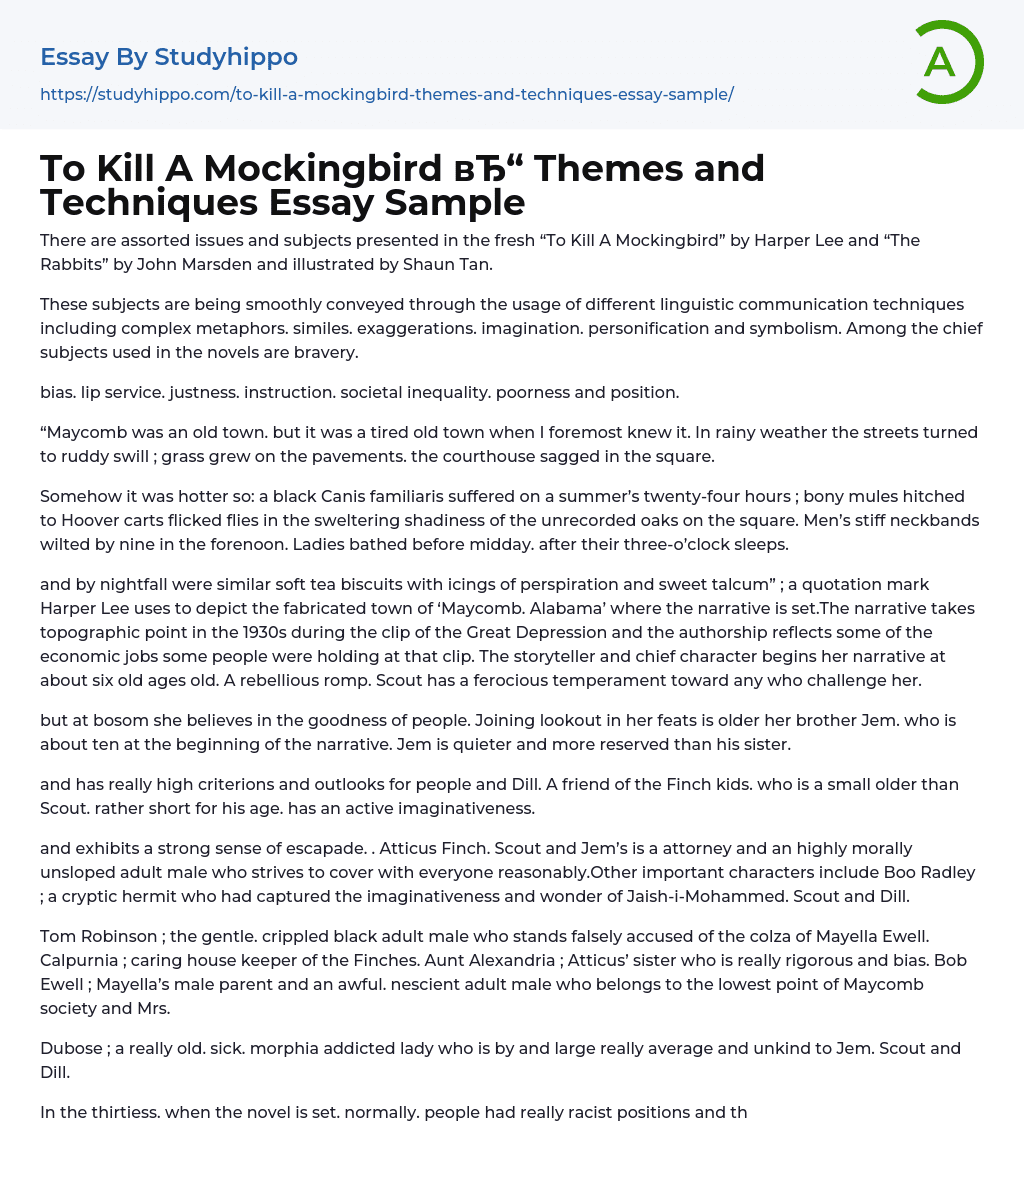 To Kill A Mockingbird Themes and Techniques Essay Sample